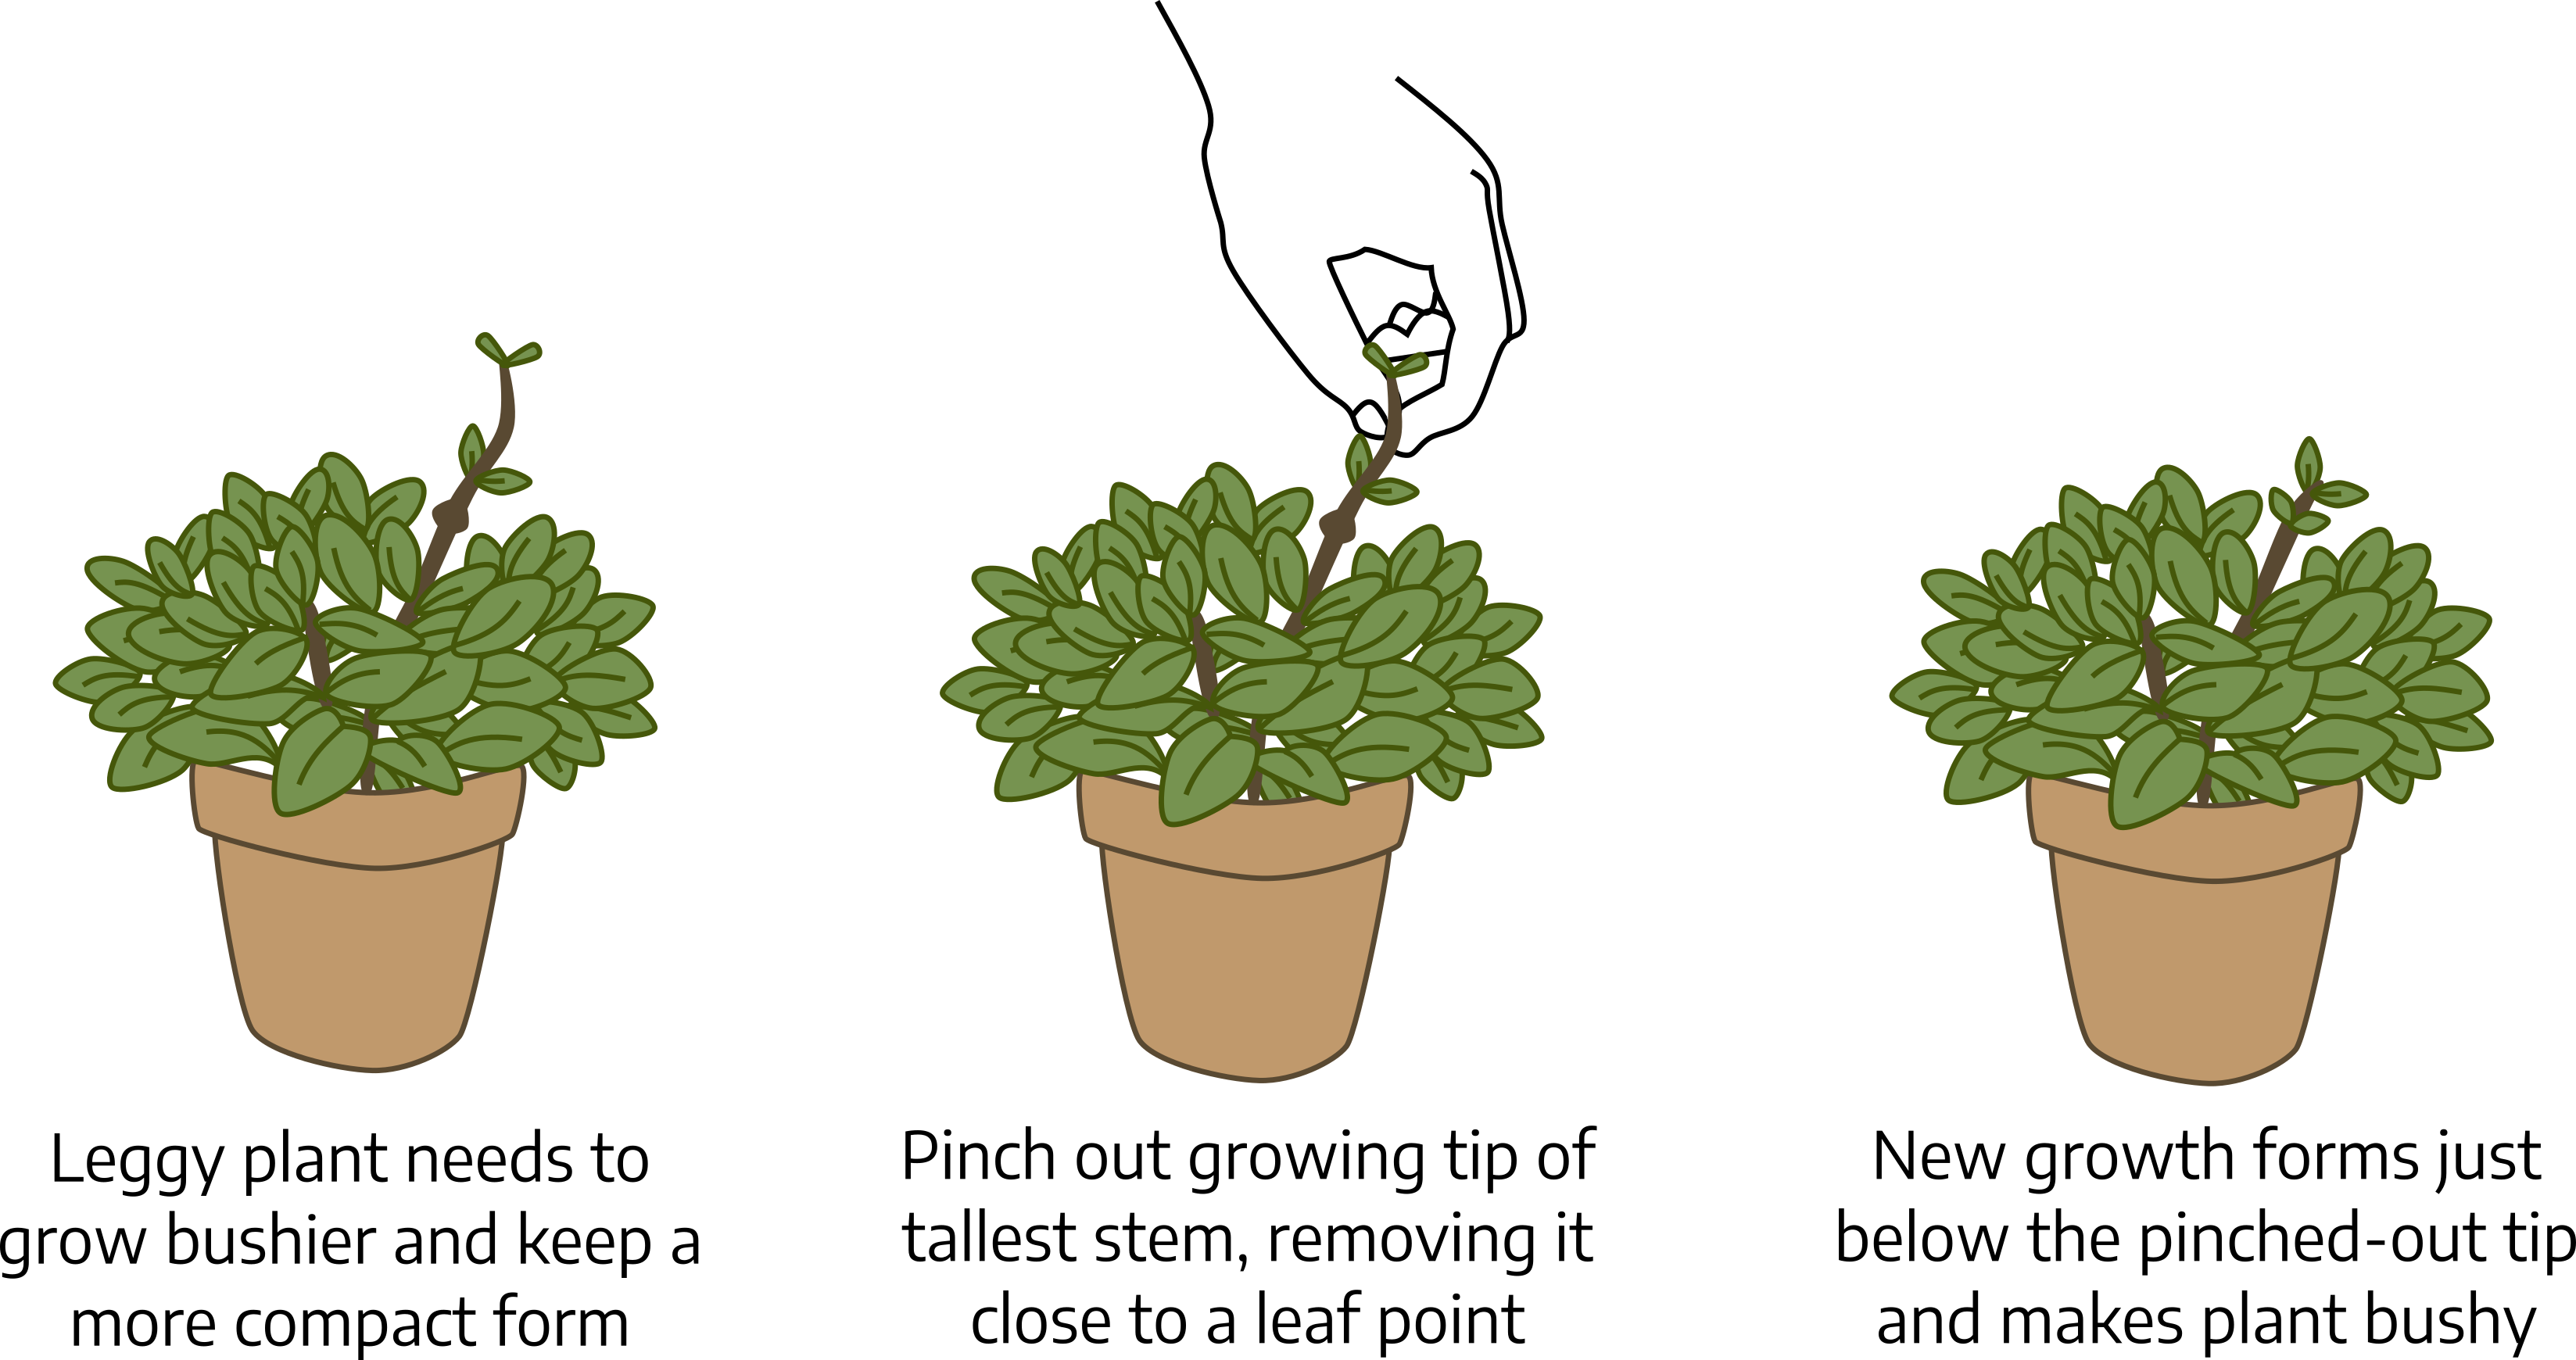 Three drawings of a plant growing from a terracotta pot. One vine-like stem grows above the foliage; first caption reads "leggy plant needs to grow bushier and keep a more compact form. Second plant shows a hand pinching the tip of vine-like stem and caption reads "pinch out growing tip of tallest stem, removing it close to a leaf point." Third plant shows the tall stem shortened back to the level of the other foliage and caption "new growth forms just below the pinched-out tip and makes plant bushy."